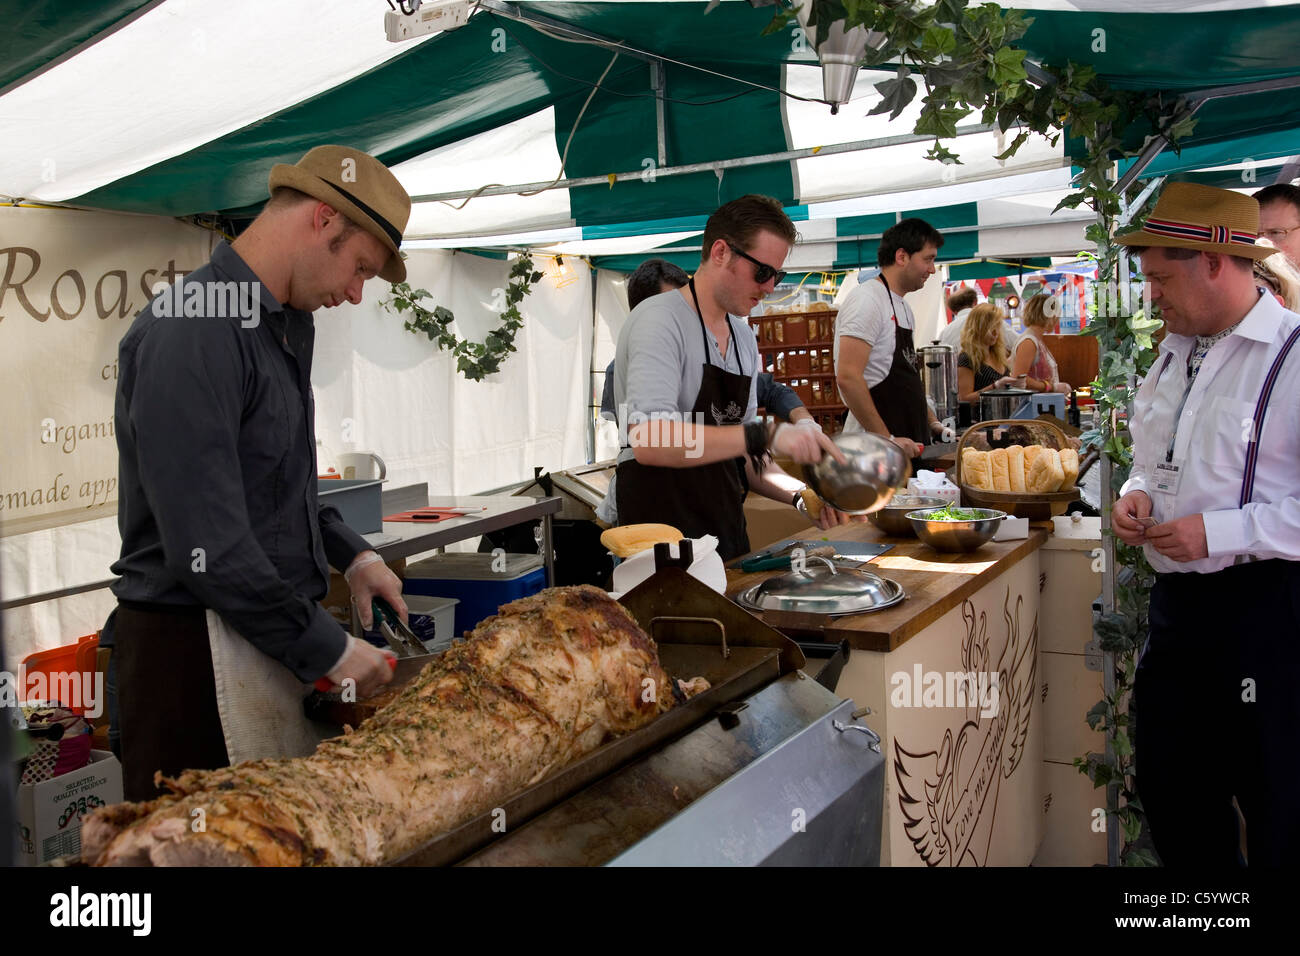 Roast Hog Stall at Food Festival on South Bank Stock Photo